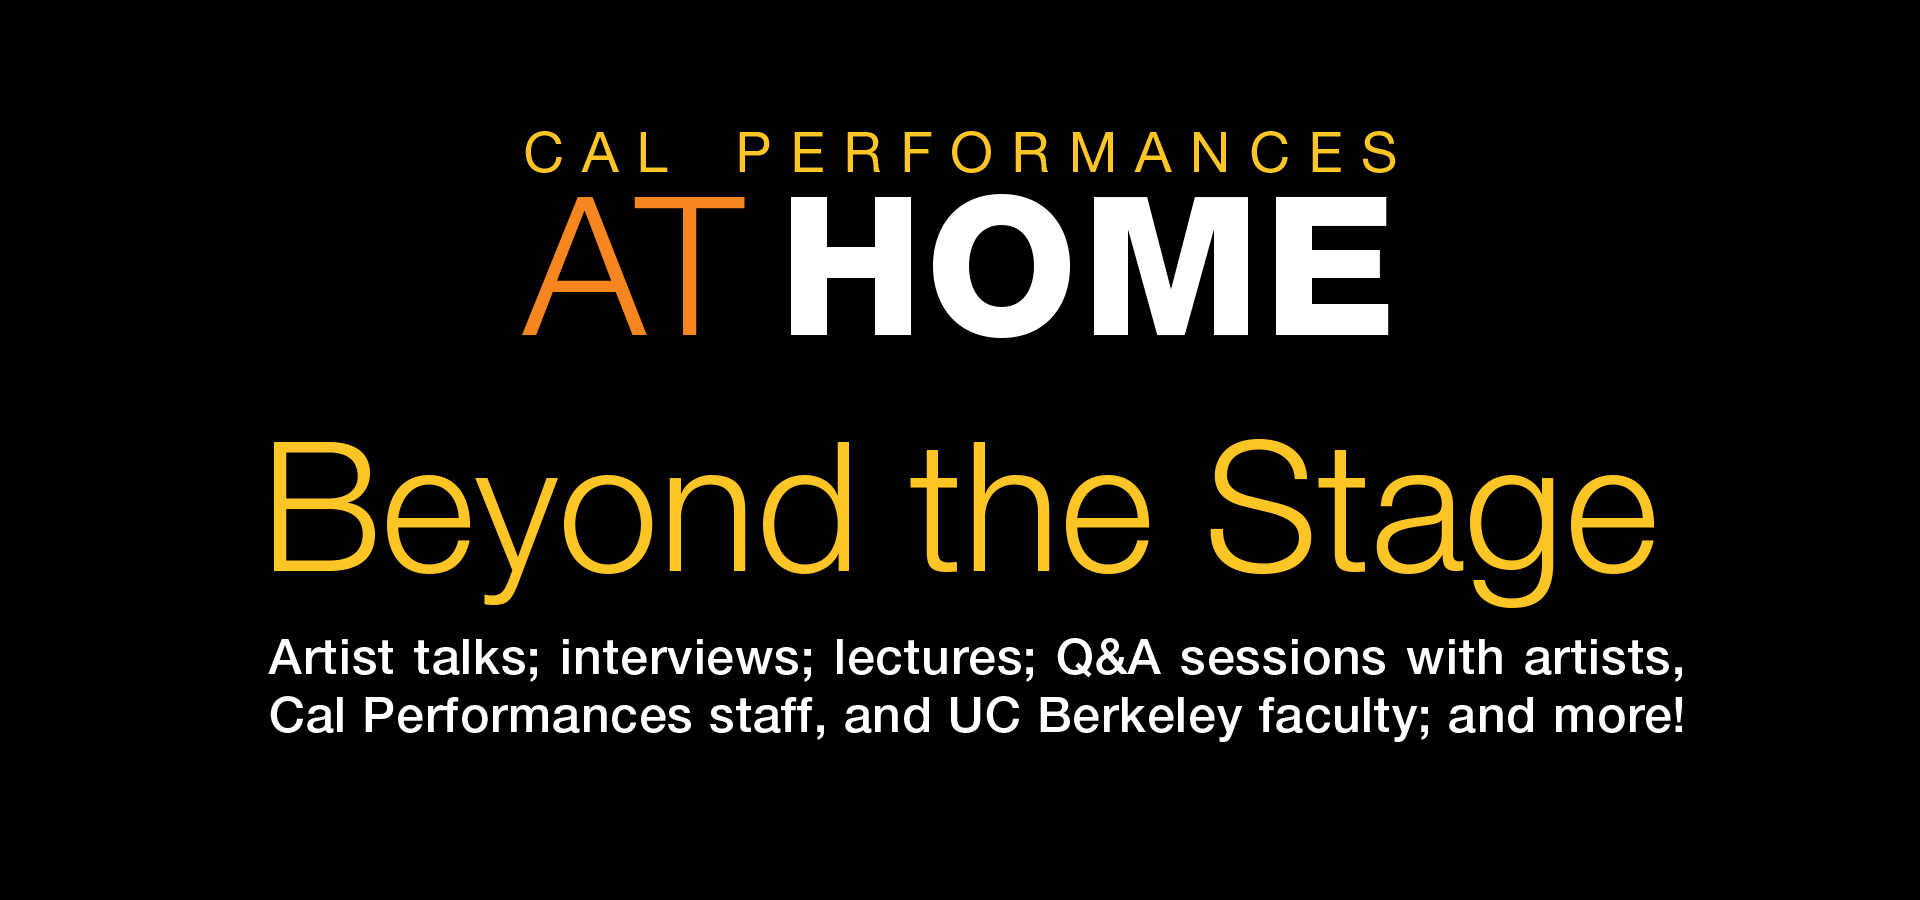 Cal Performances at Home: Beyond the Stage. Artist talks; interviews; lectures; Q&A sessions with artists, Cal Performances staff, and UC Berkeley faculty; and more!